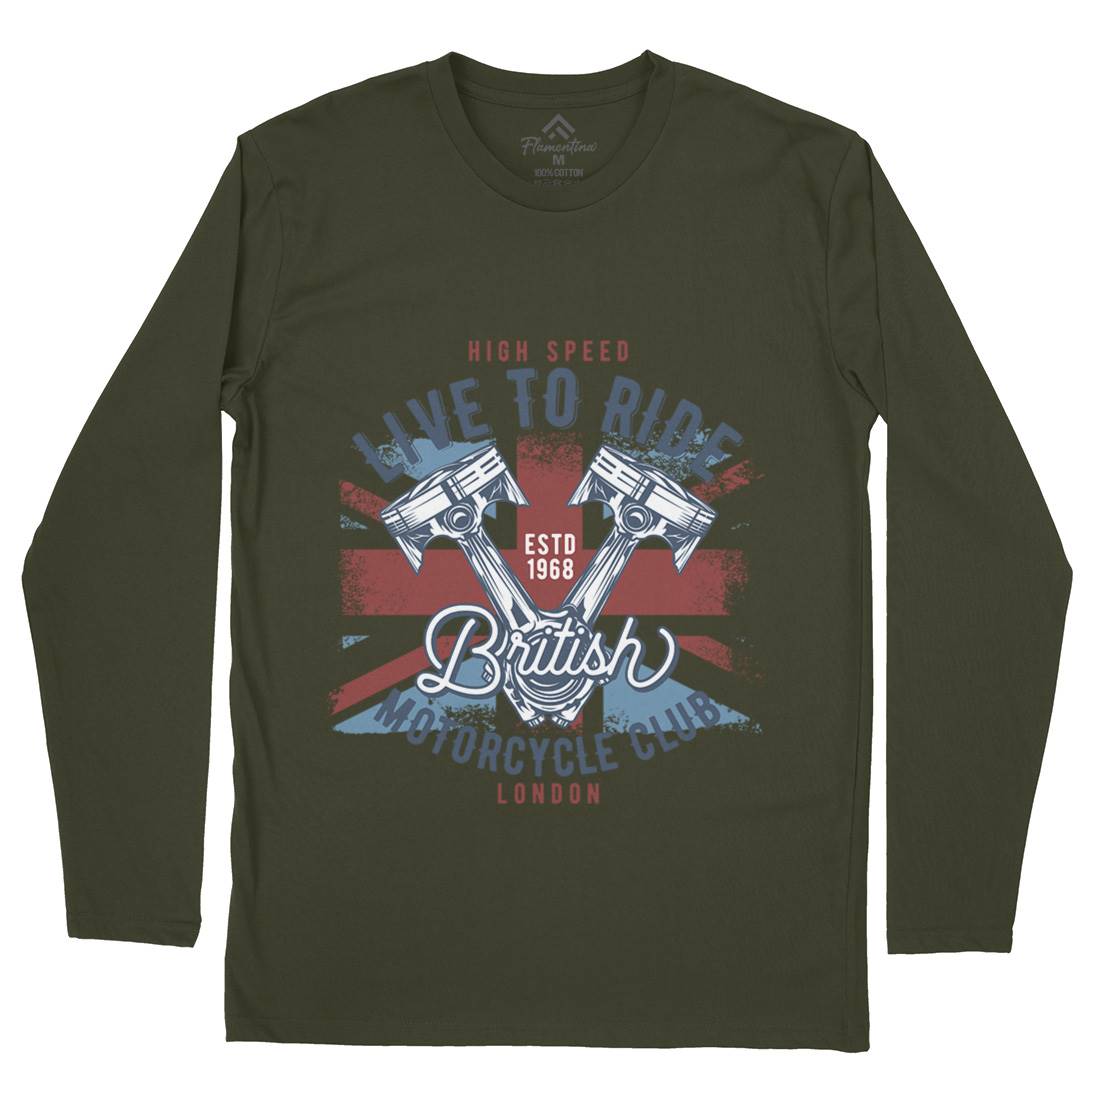 Live To Ride Mens Long Sleeve T-Shirt Motorcycles B837